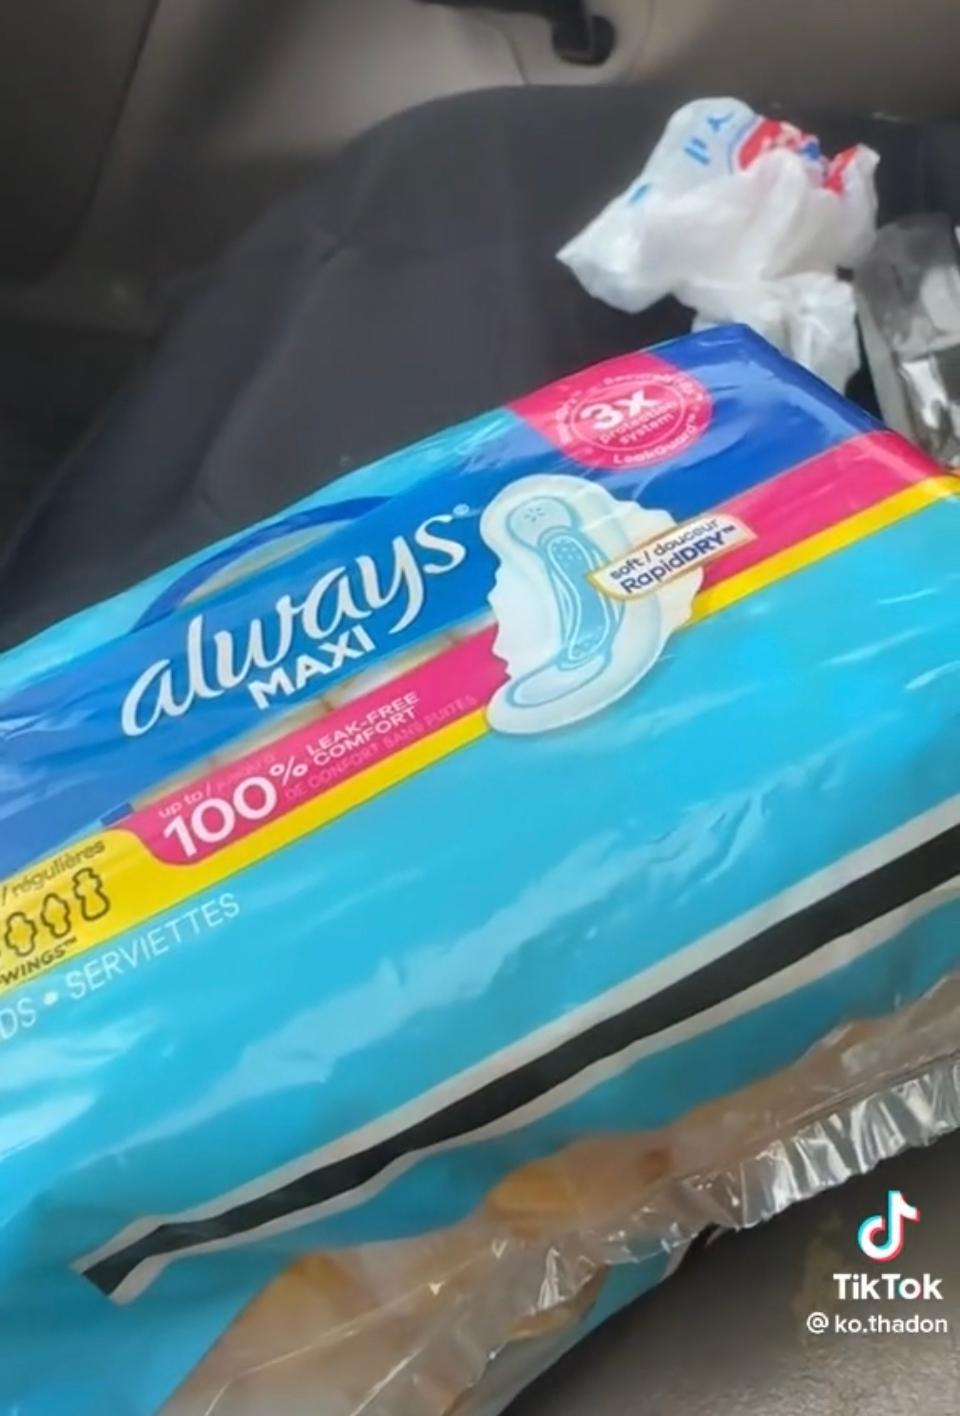 TikTok dad bought pads for his daughter